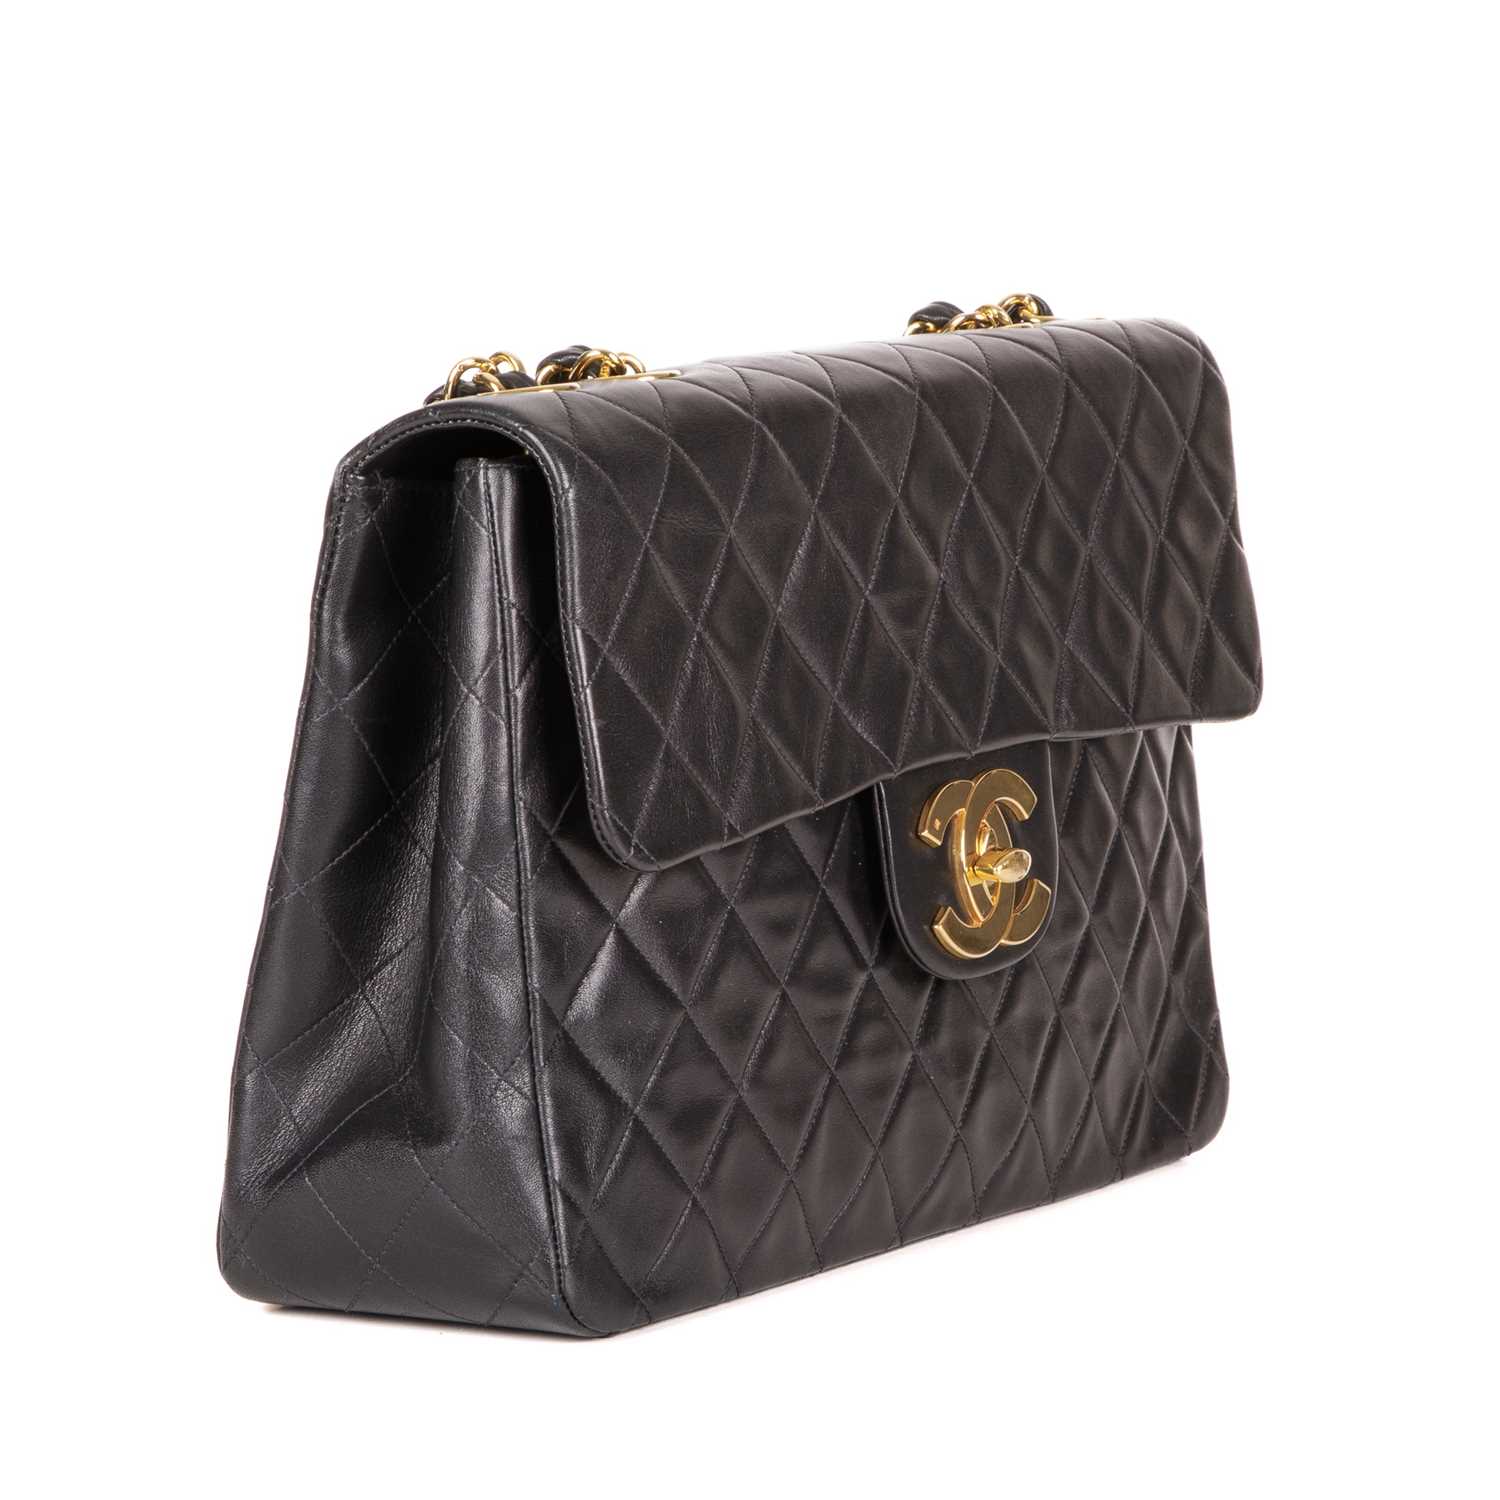 Chanel, a vintage Maxi Single Flap handbag, designed with a diamond quilted black leather - Image 3 of 4